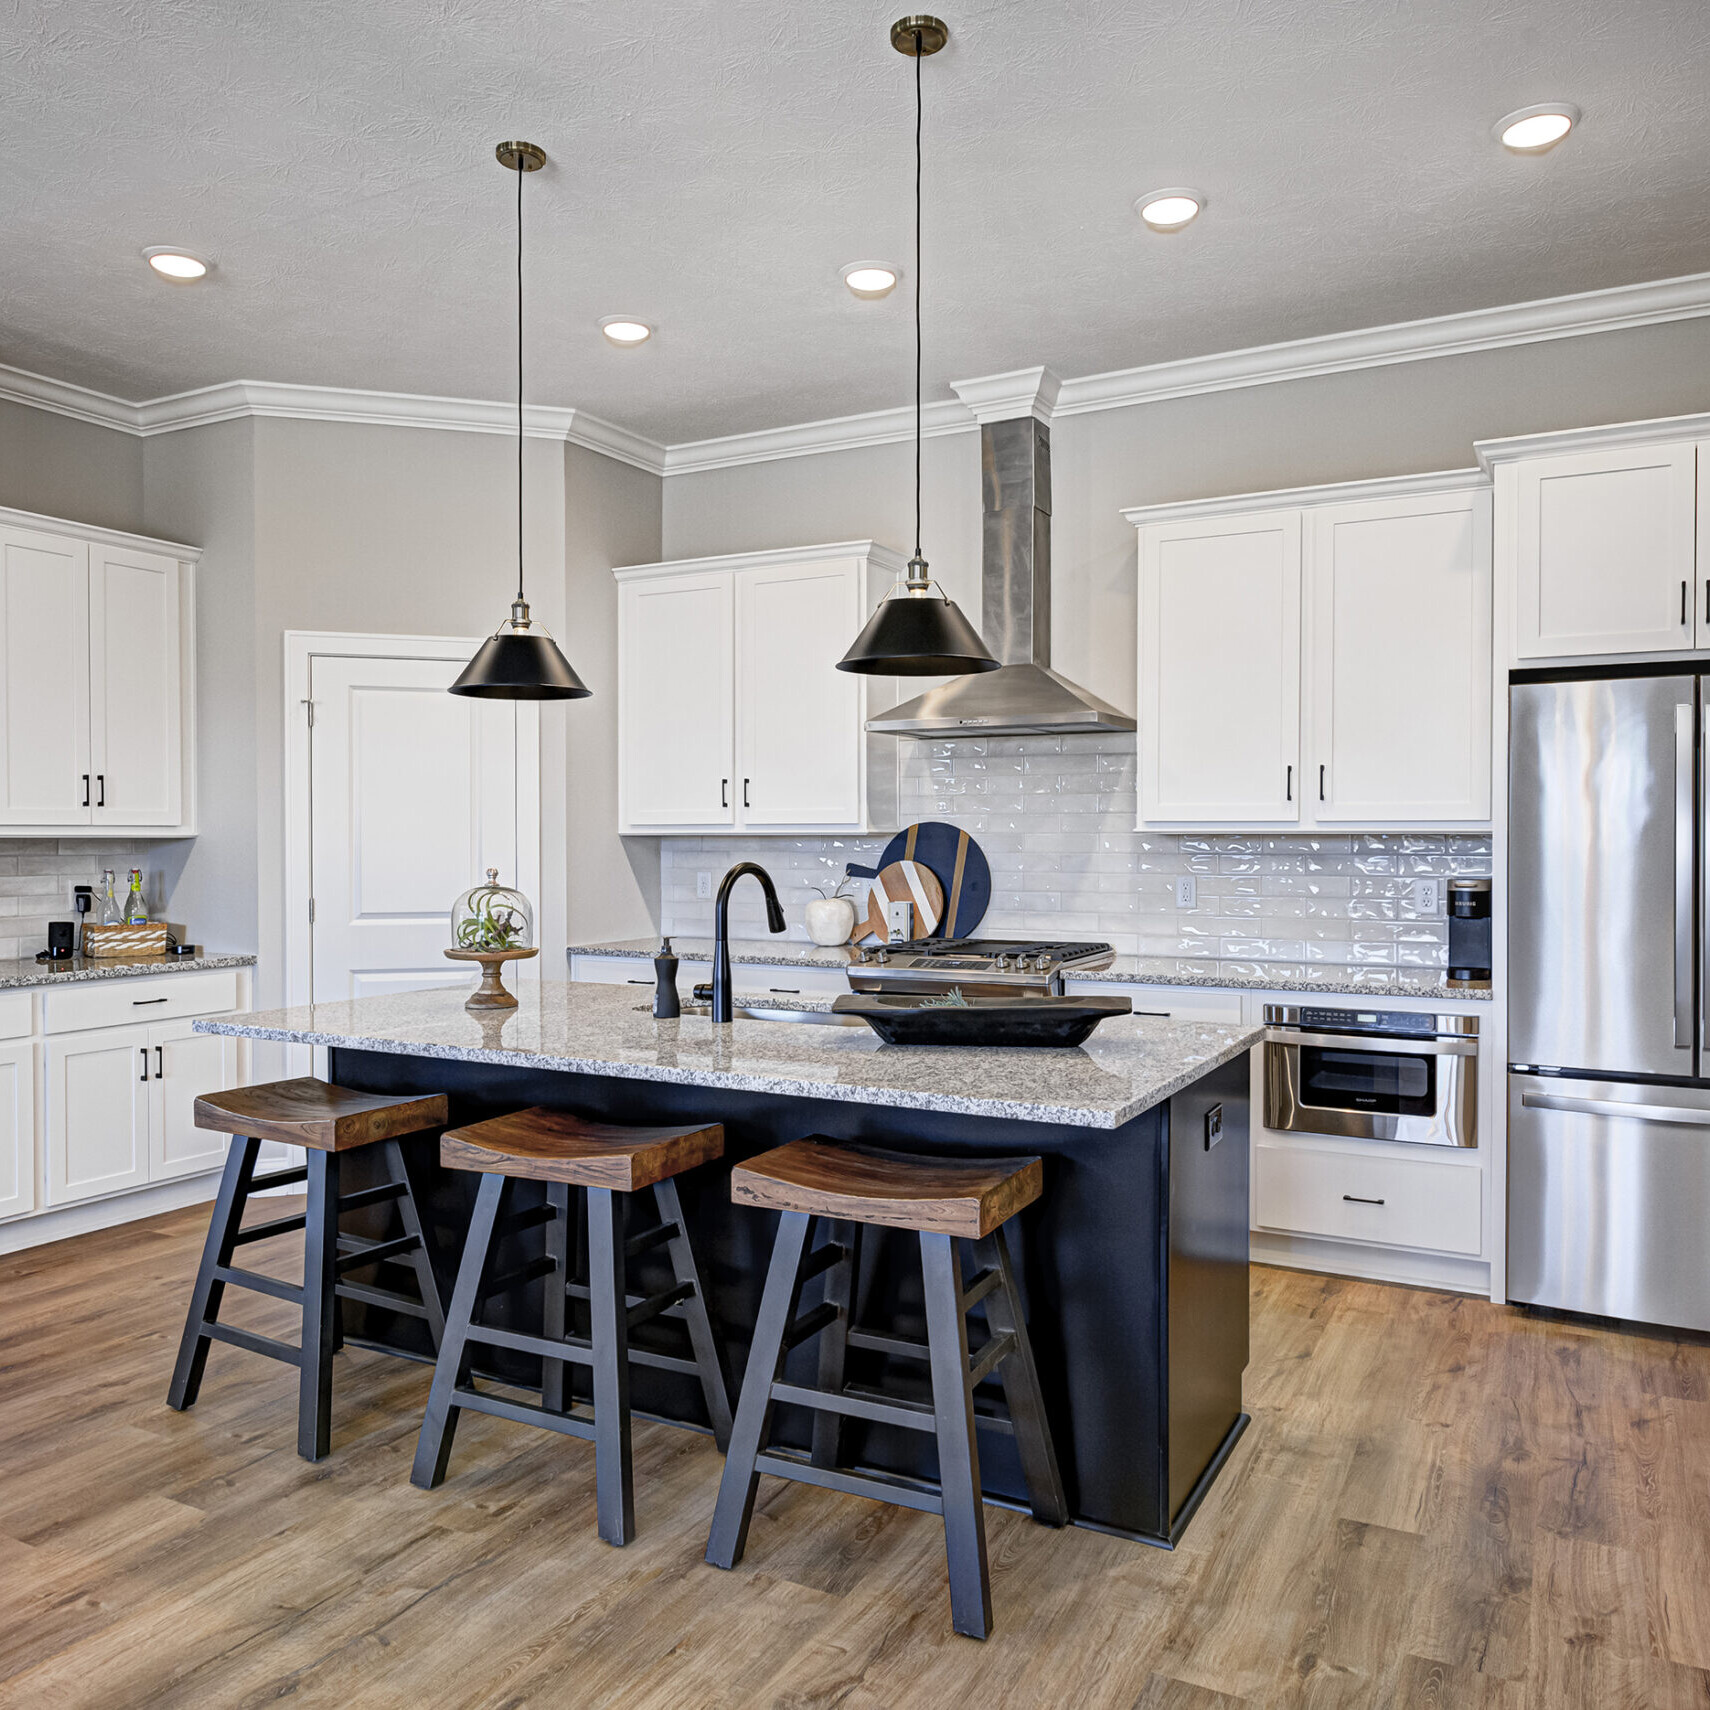 A kitchen with white cabinets and stainless steel appliances, the perfect addition to custom homes in Carmel Indiana.